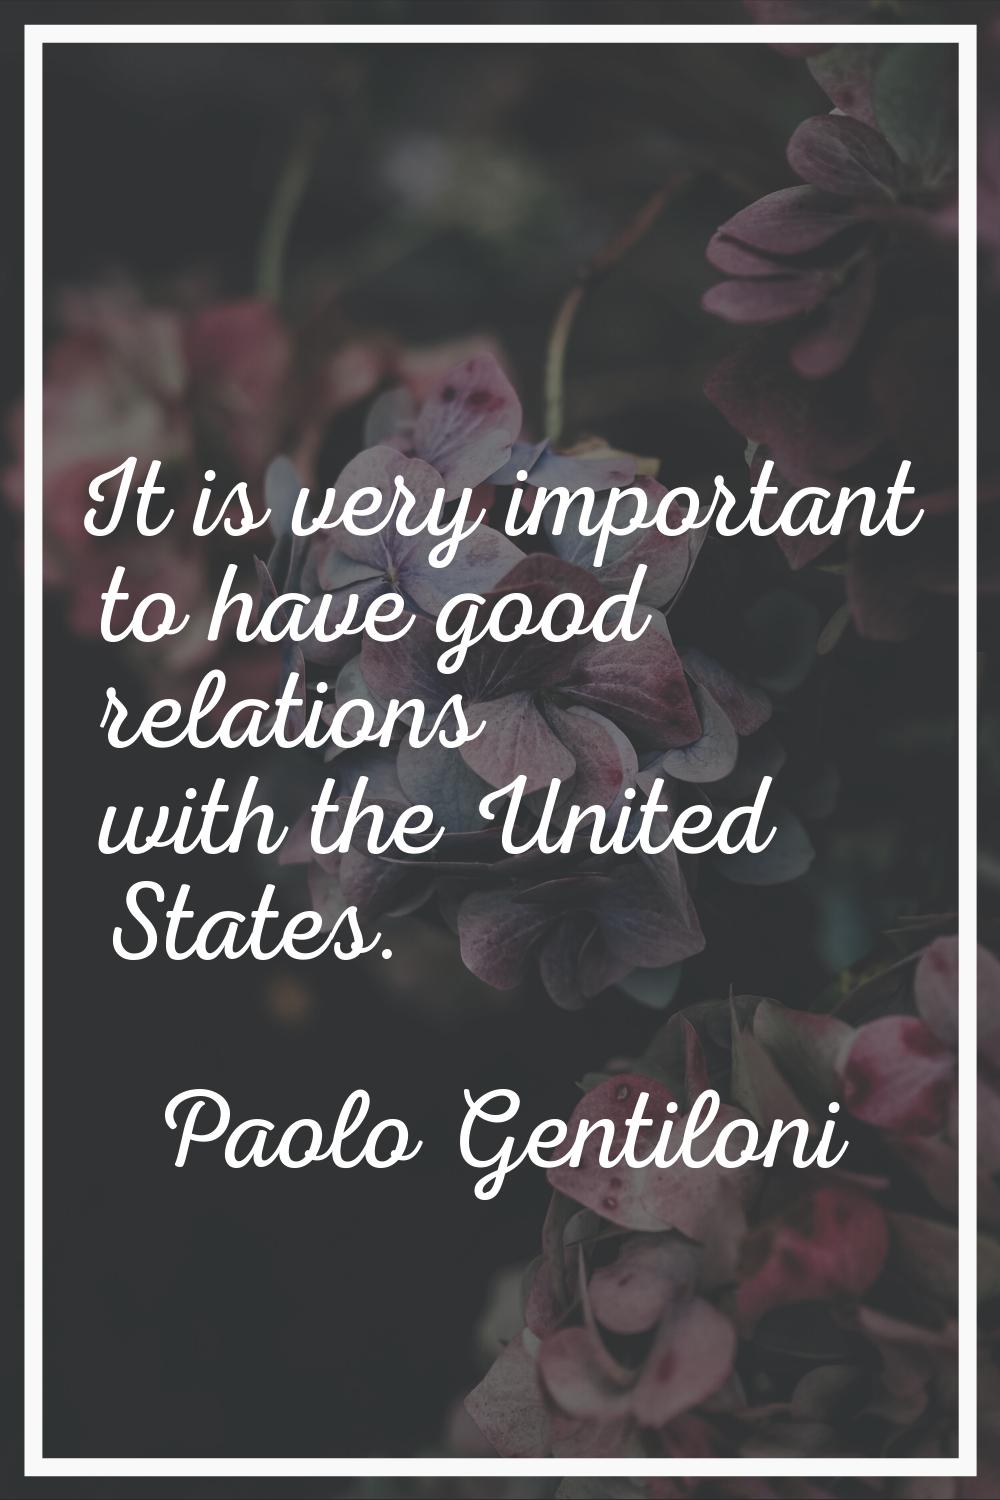 It is very important to have good relations with the United States.